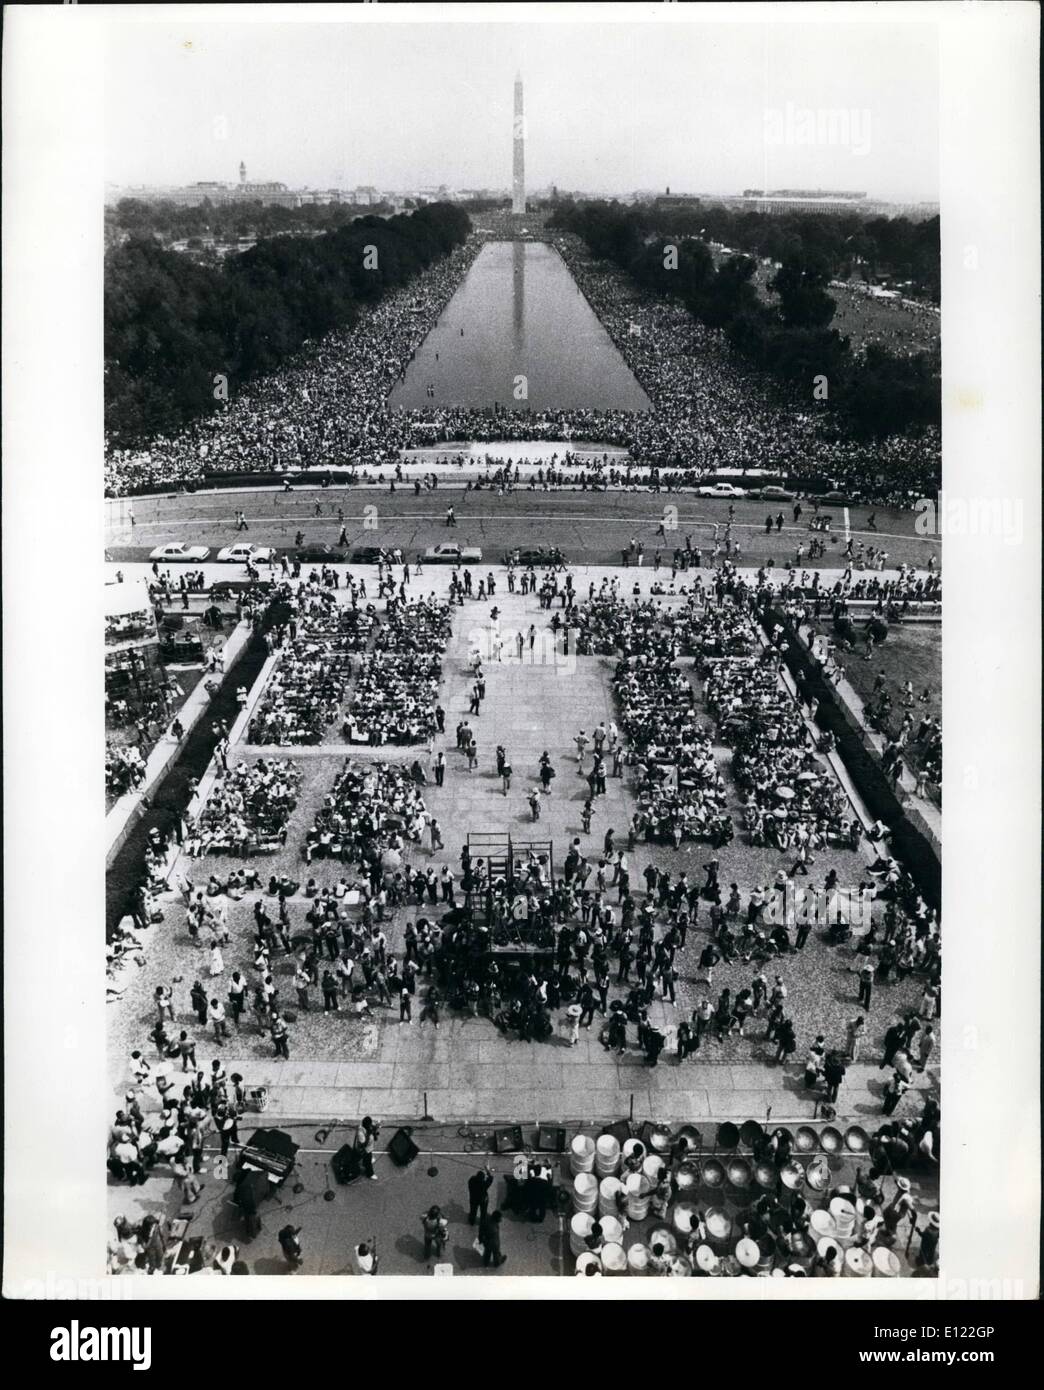 Aug. 08, 1983 - The March on Washington: An over all shot of the marchers and the speakers platform taken from the steps of the Stock Photo